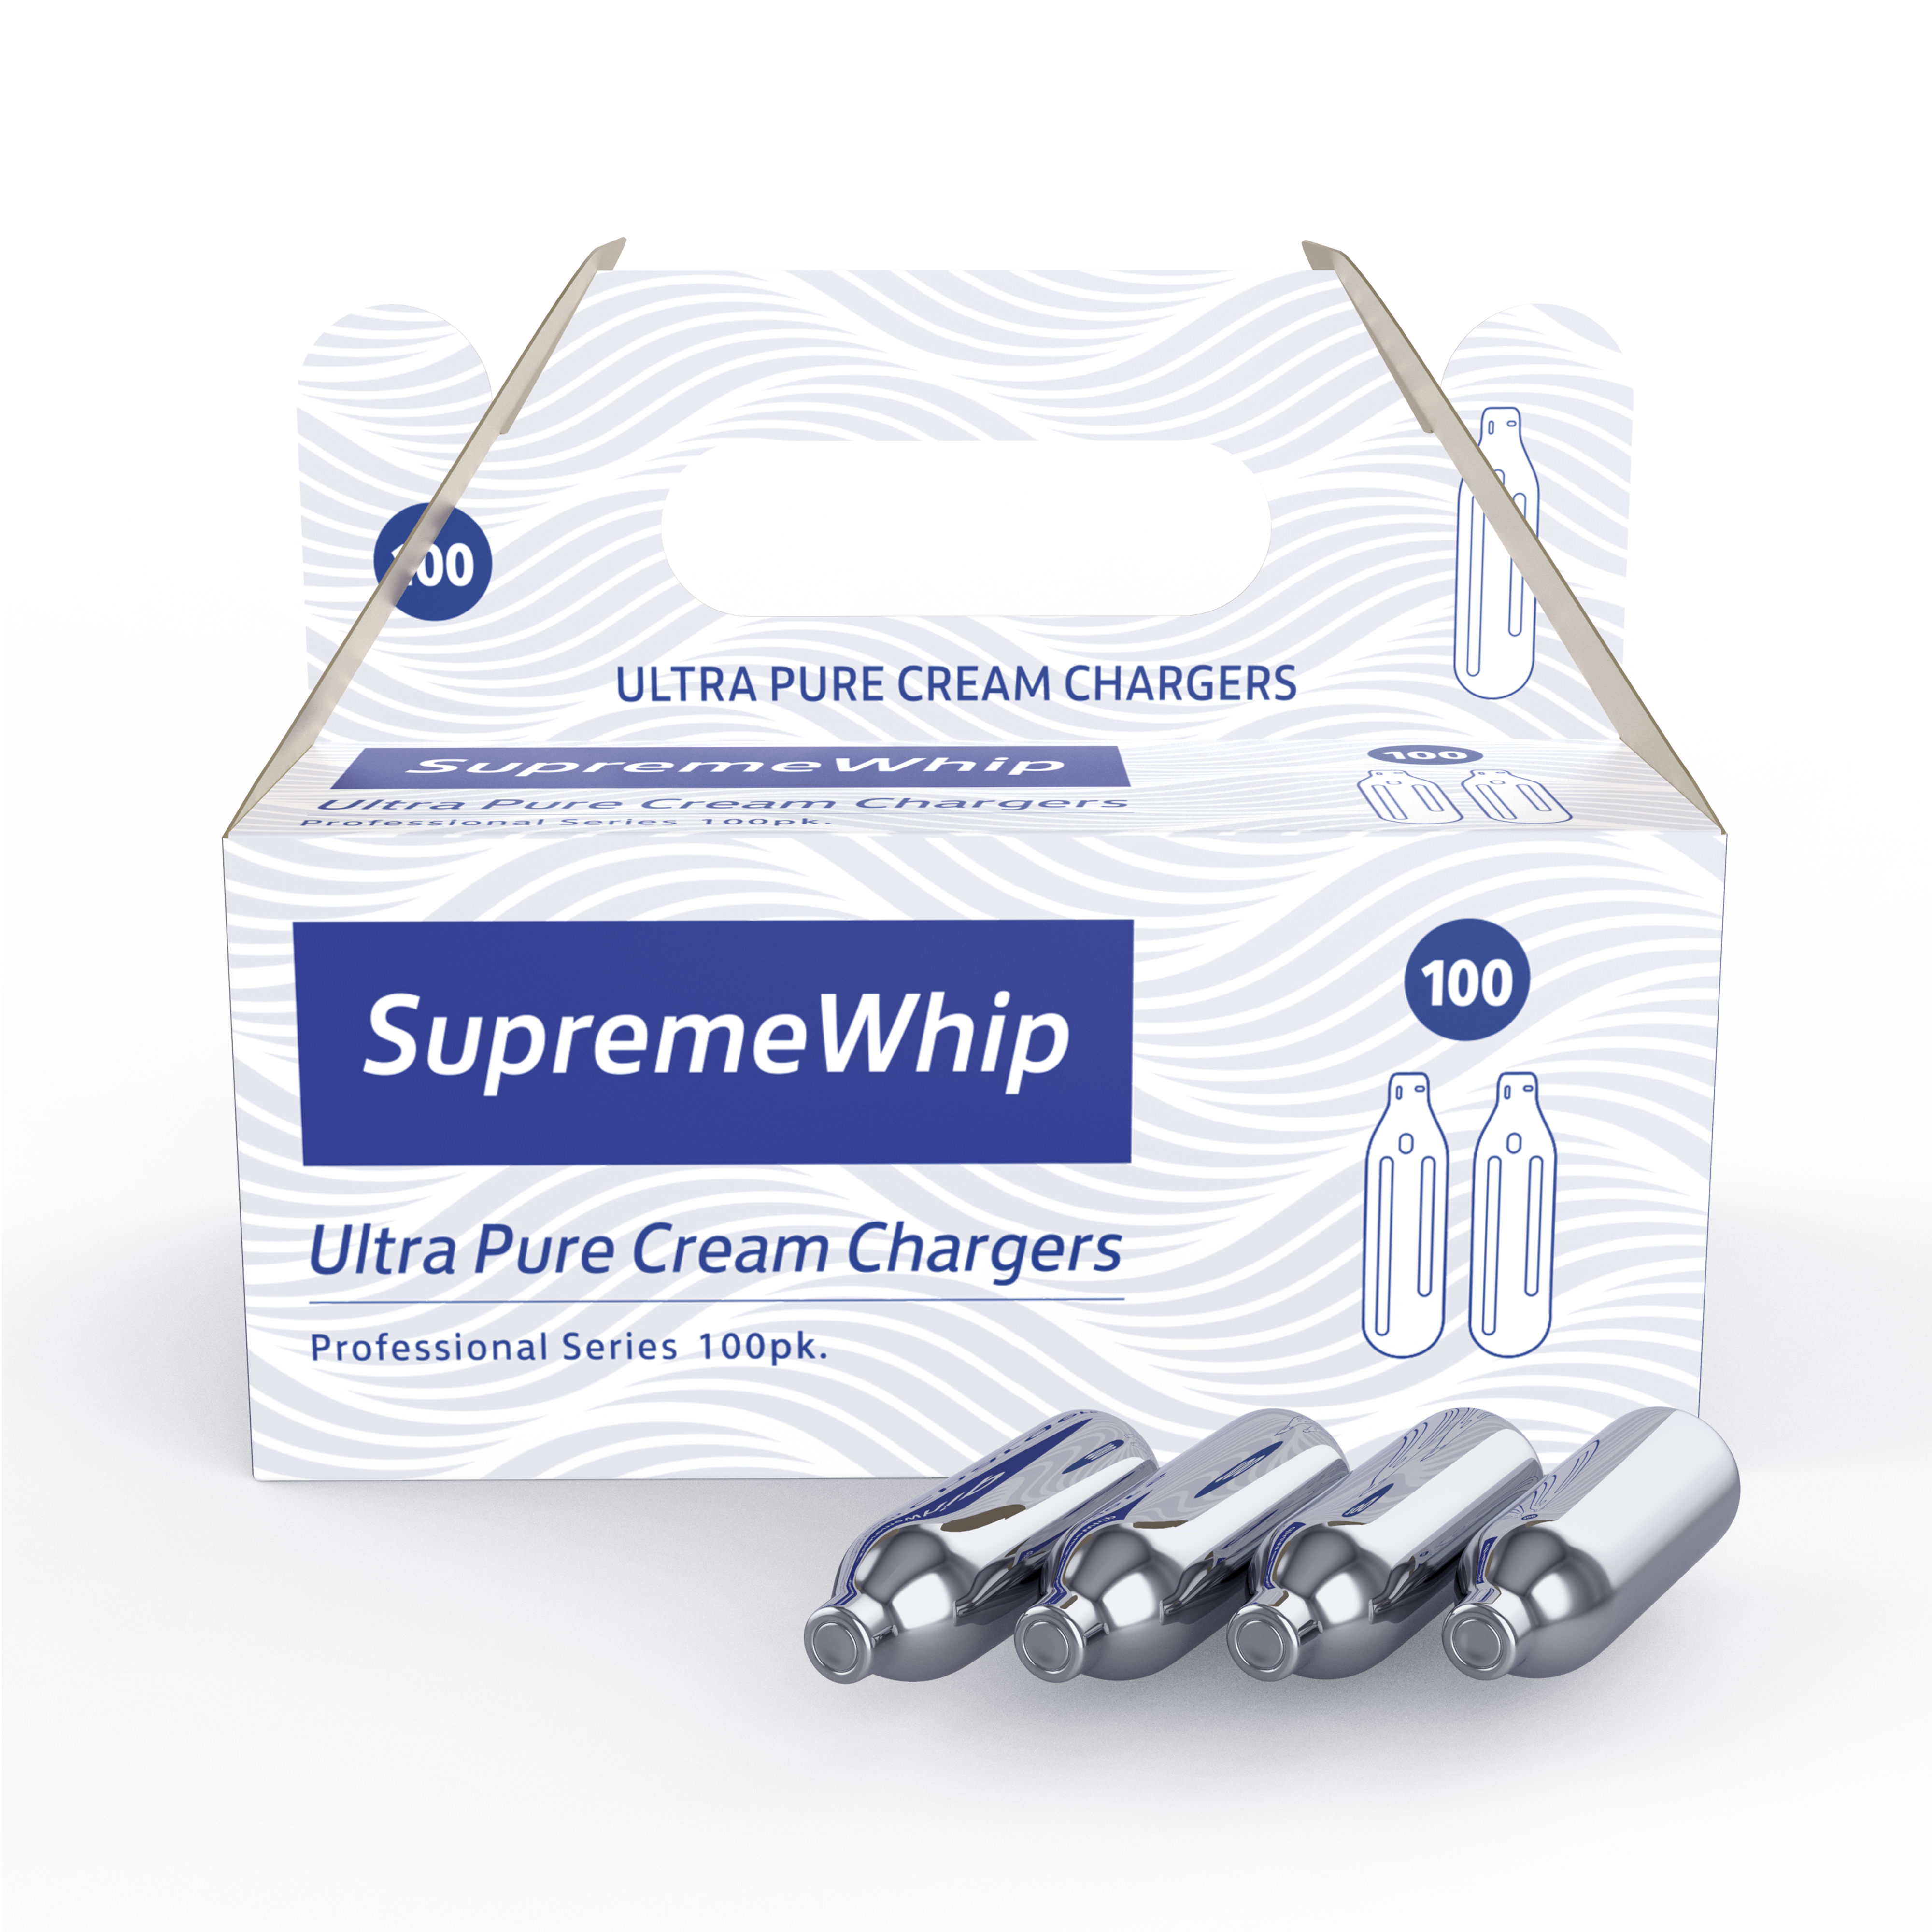 SupremeWhip Cream Chargers 8.2g in 100Pks WHOLESALE